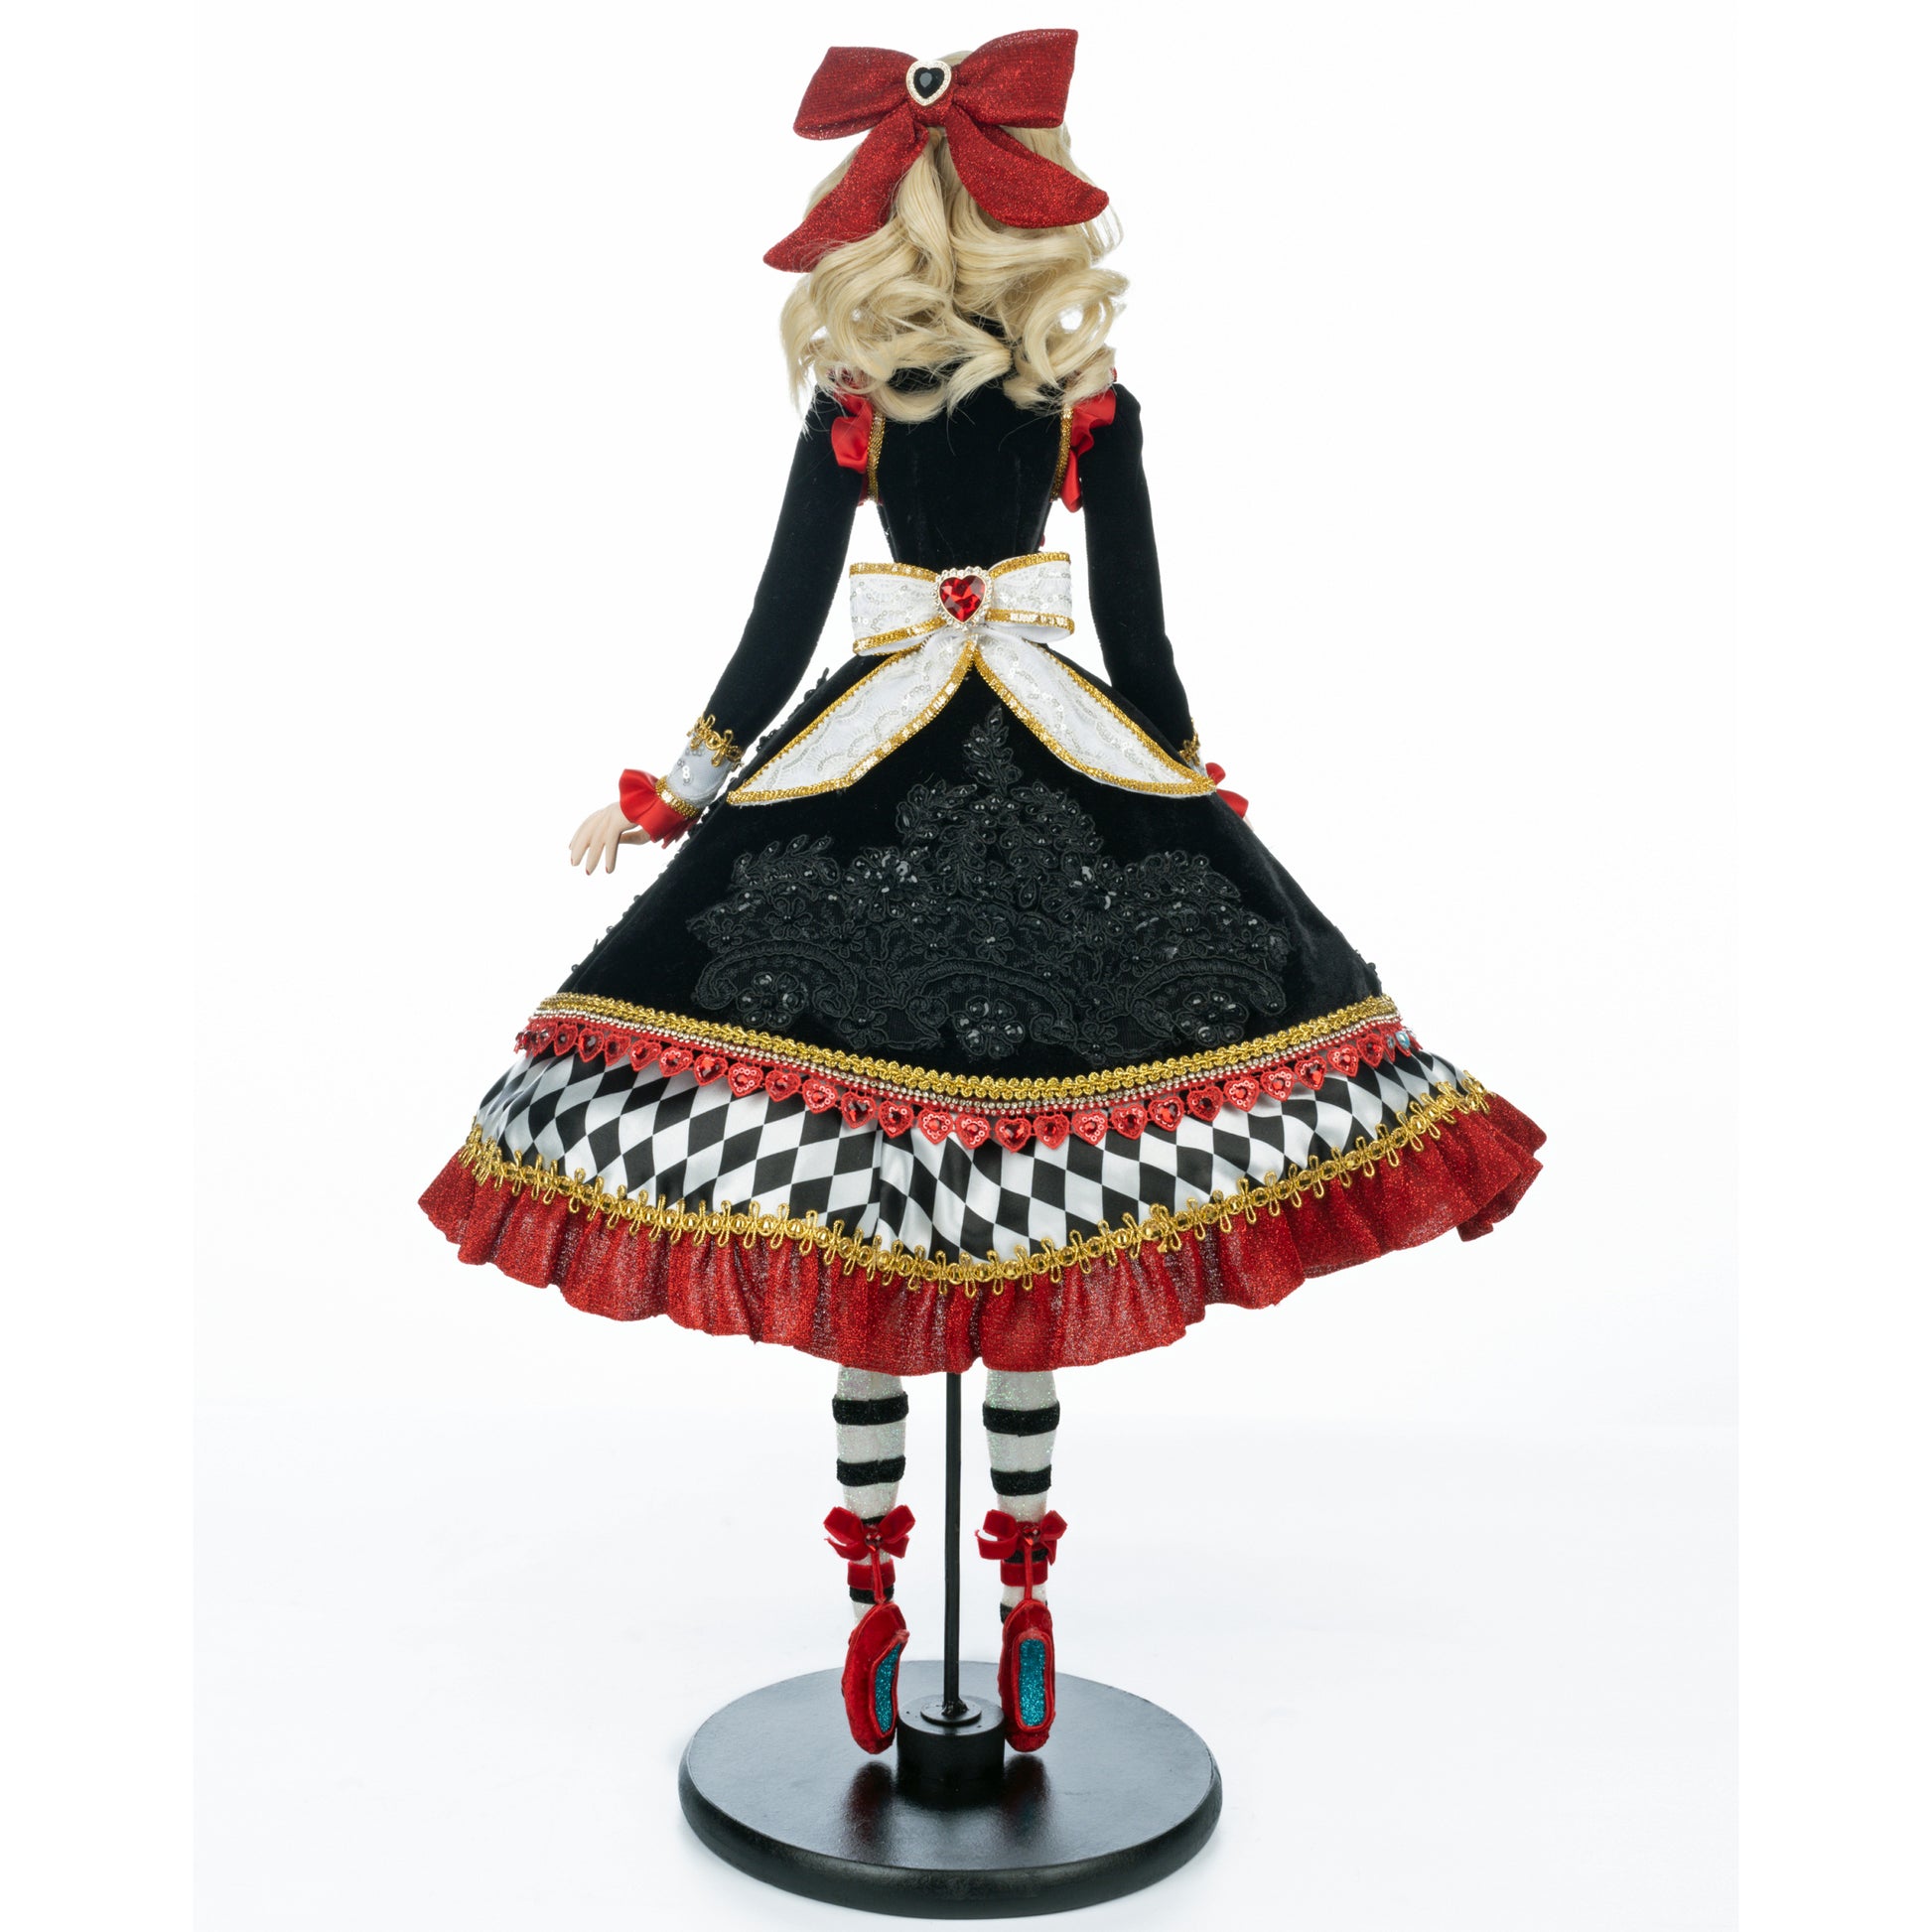 At Auction: A group of over 20 Alice in Wonderland assorted collectible